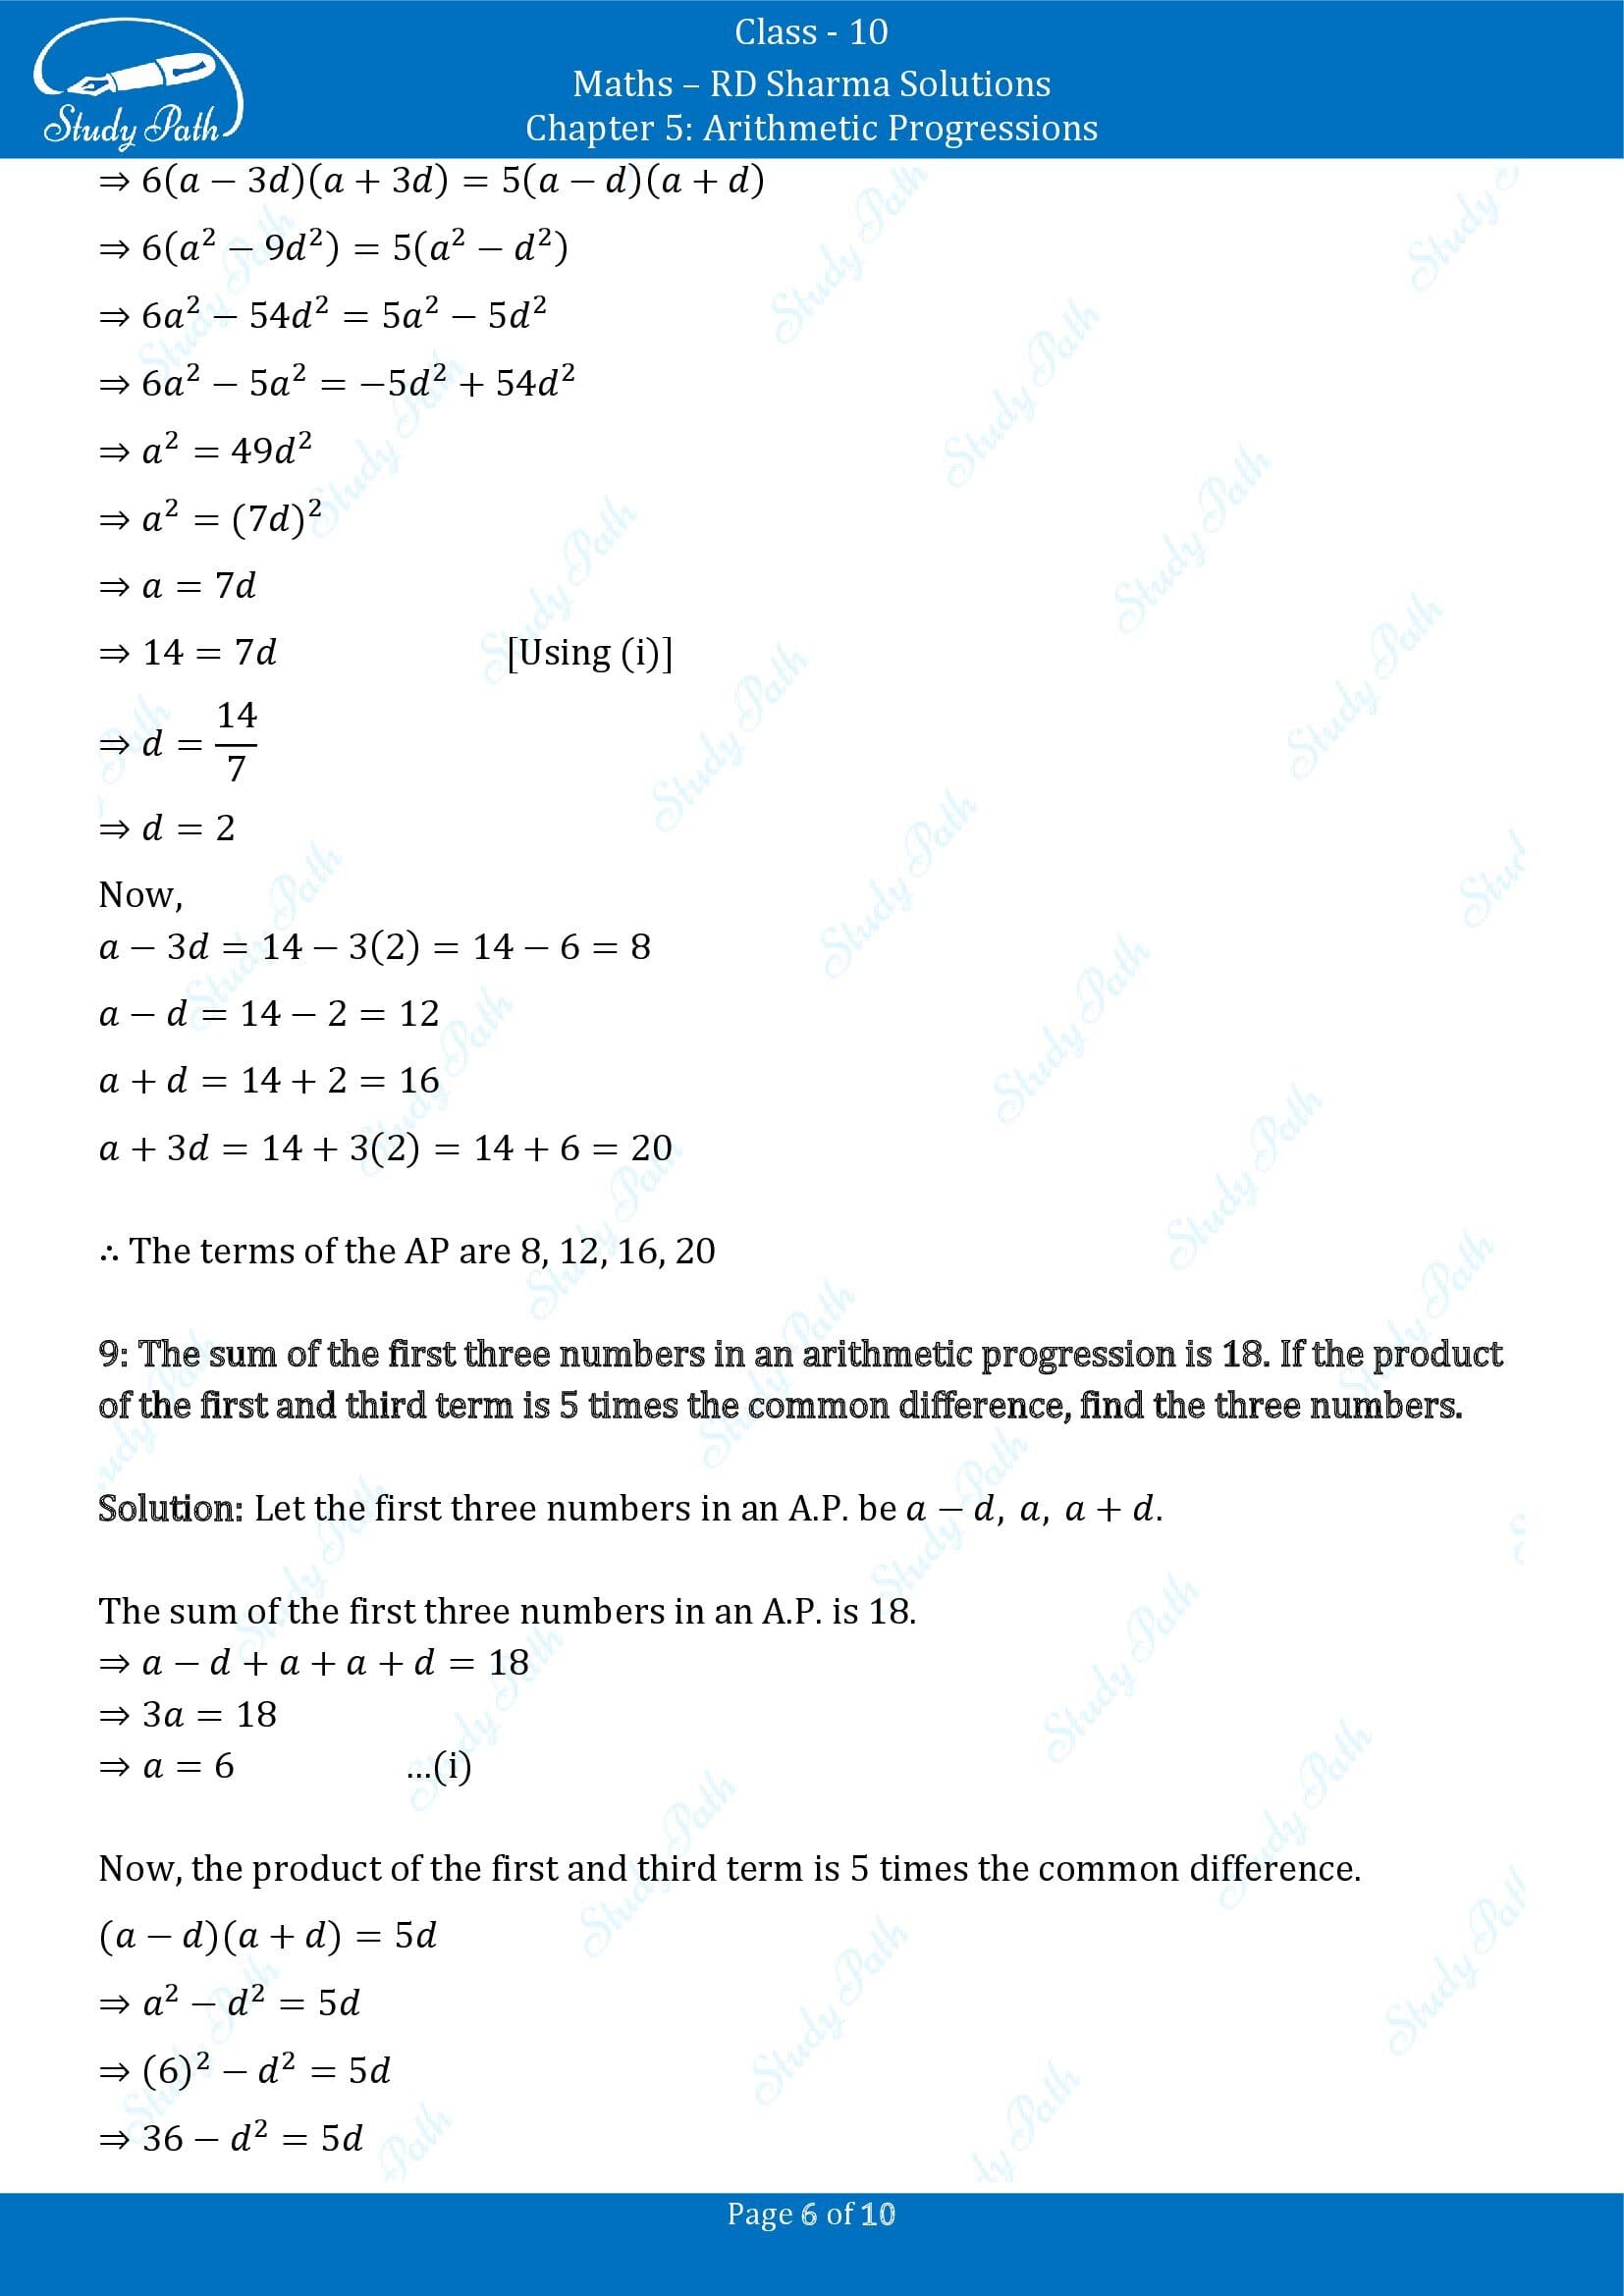 RD Sharma Solutions Class 10 Chapter 5 Arithmetic Progressions Exercise 5.5 00006